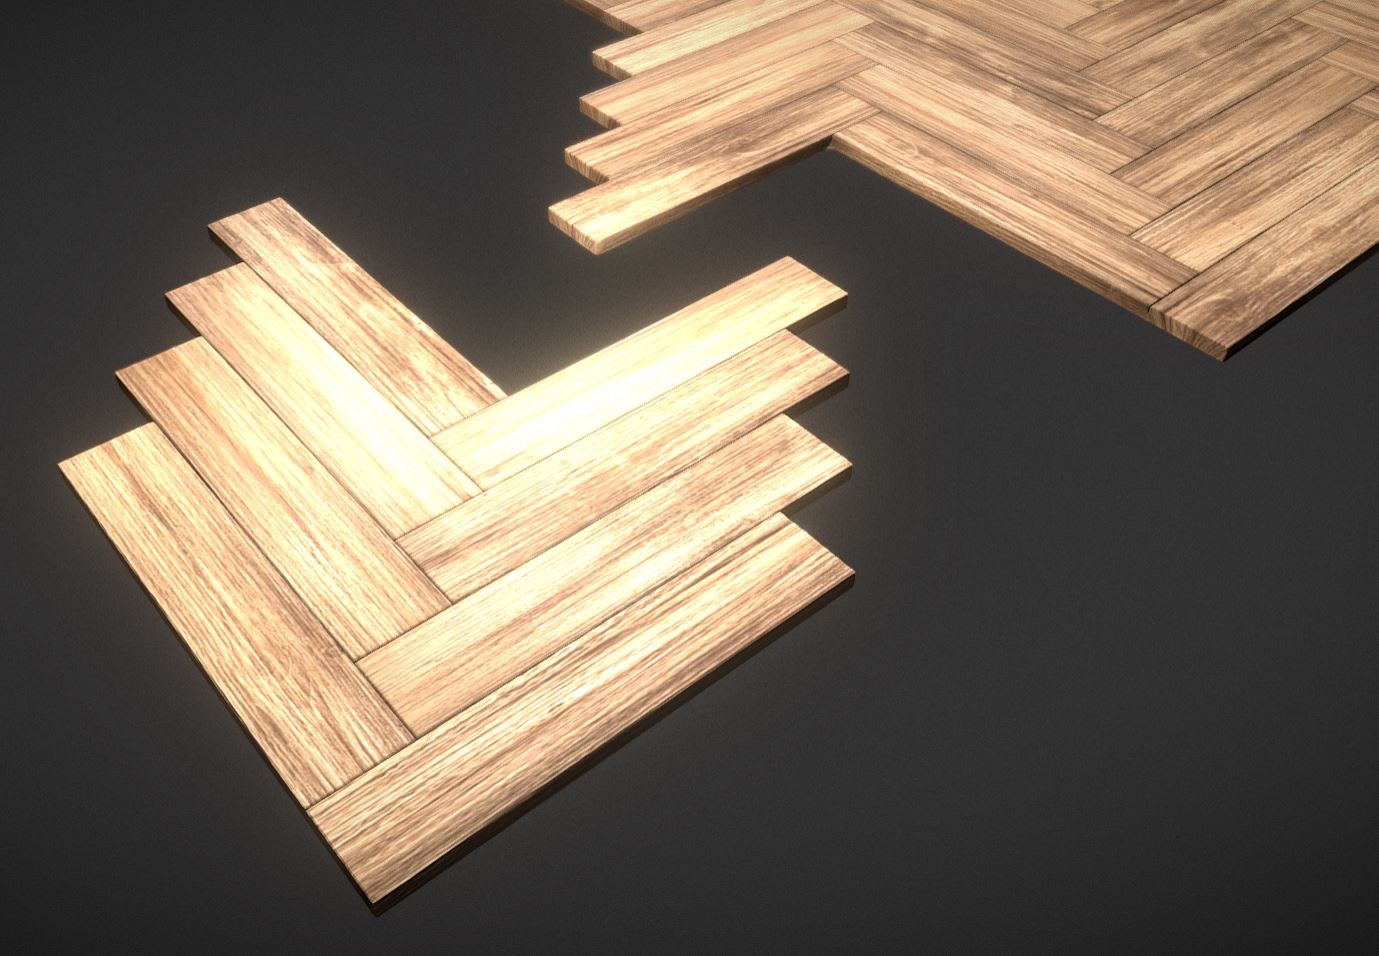 Parquet Floor (High-Poly) For Texture Baking